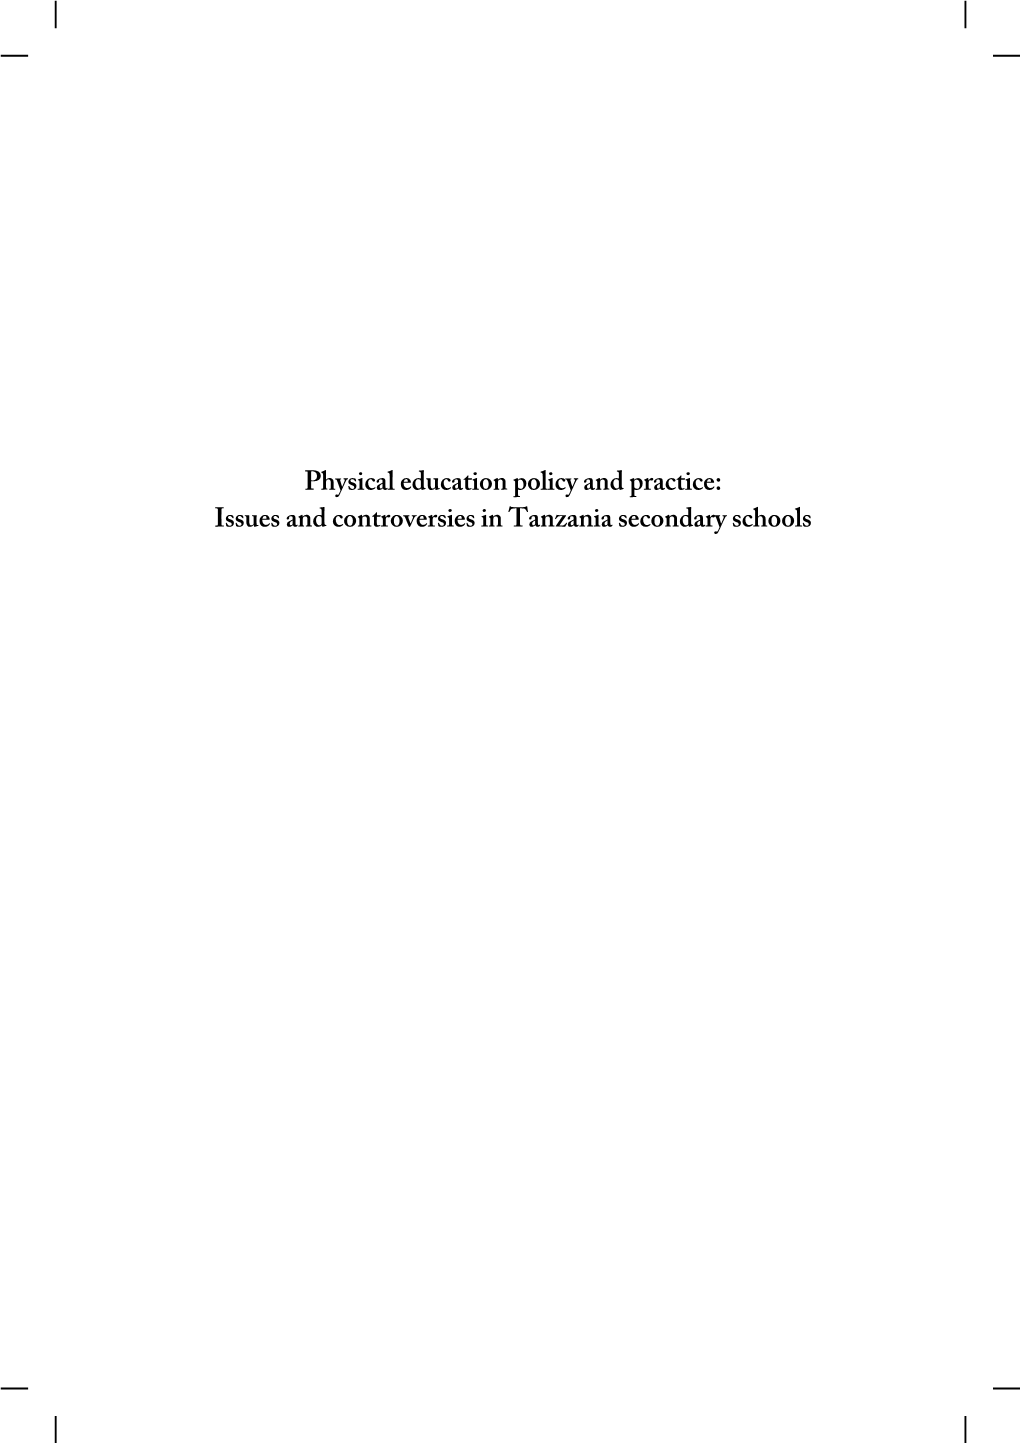 Physical Education Policy and Practice: Issues and Controversies in Tanzania Secondary Schools